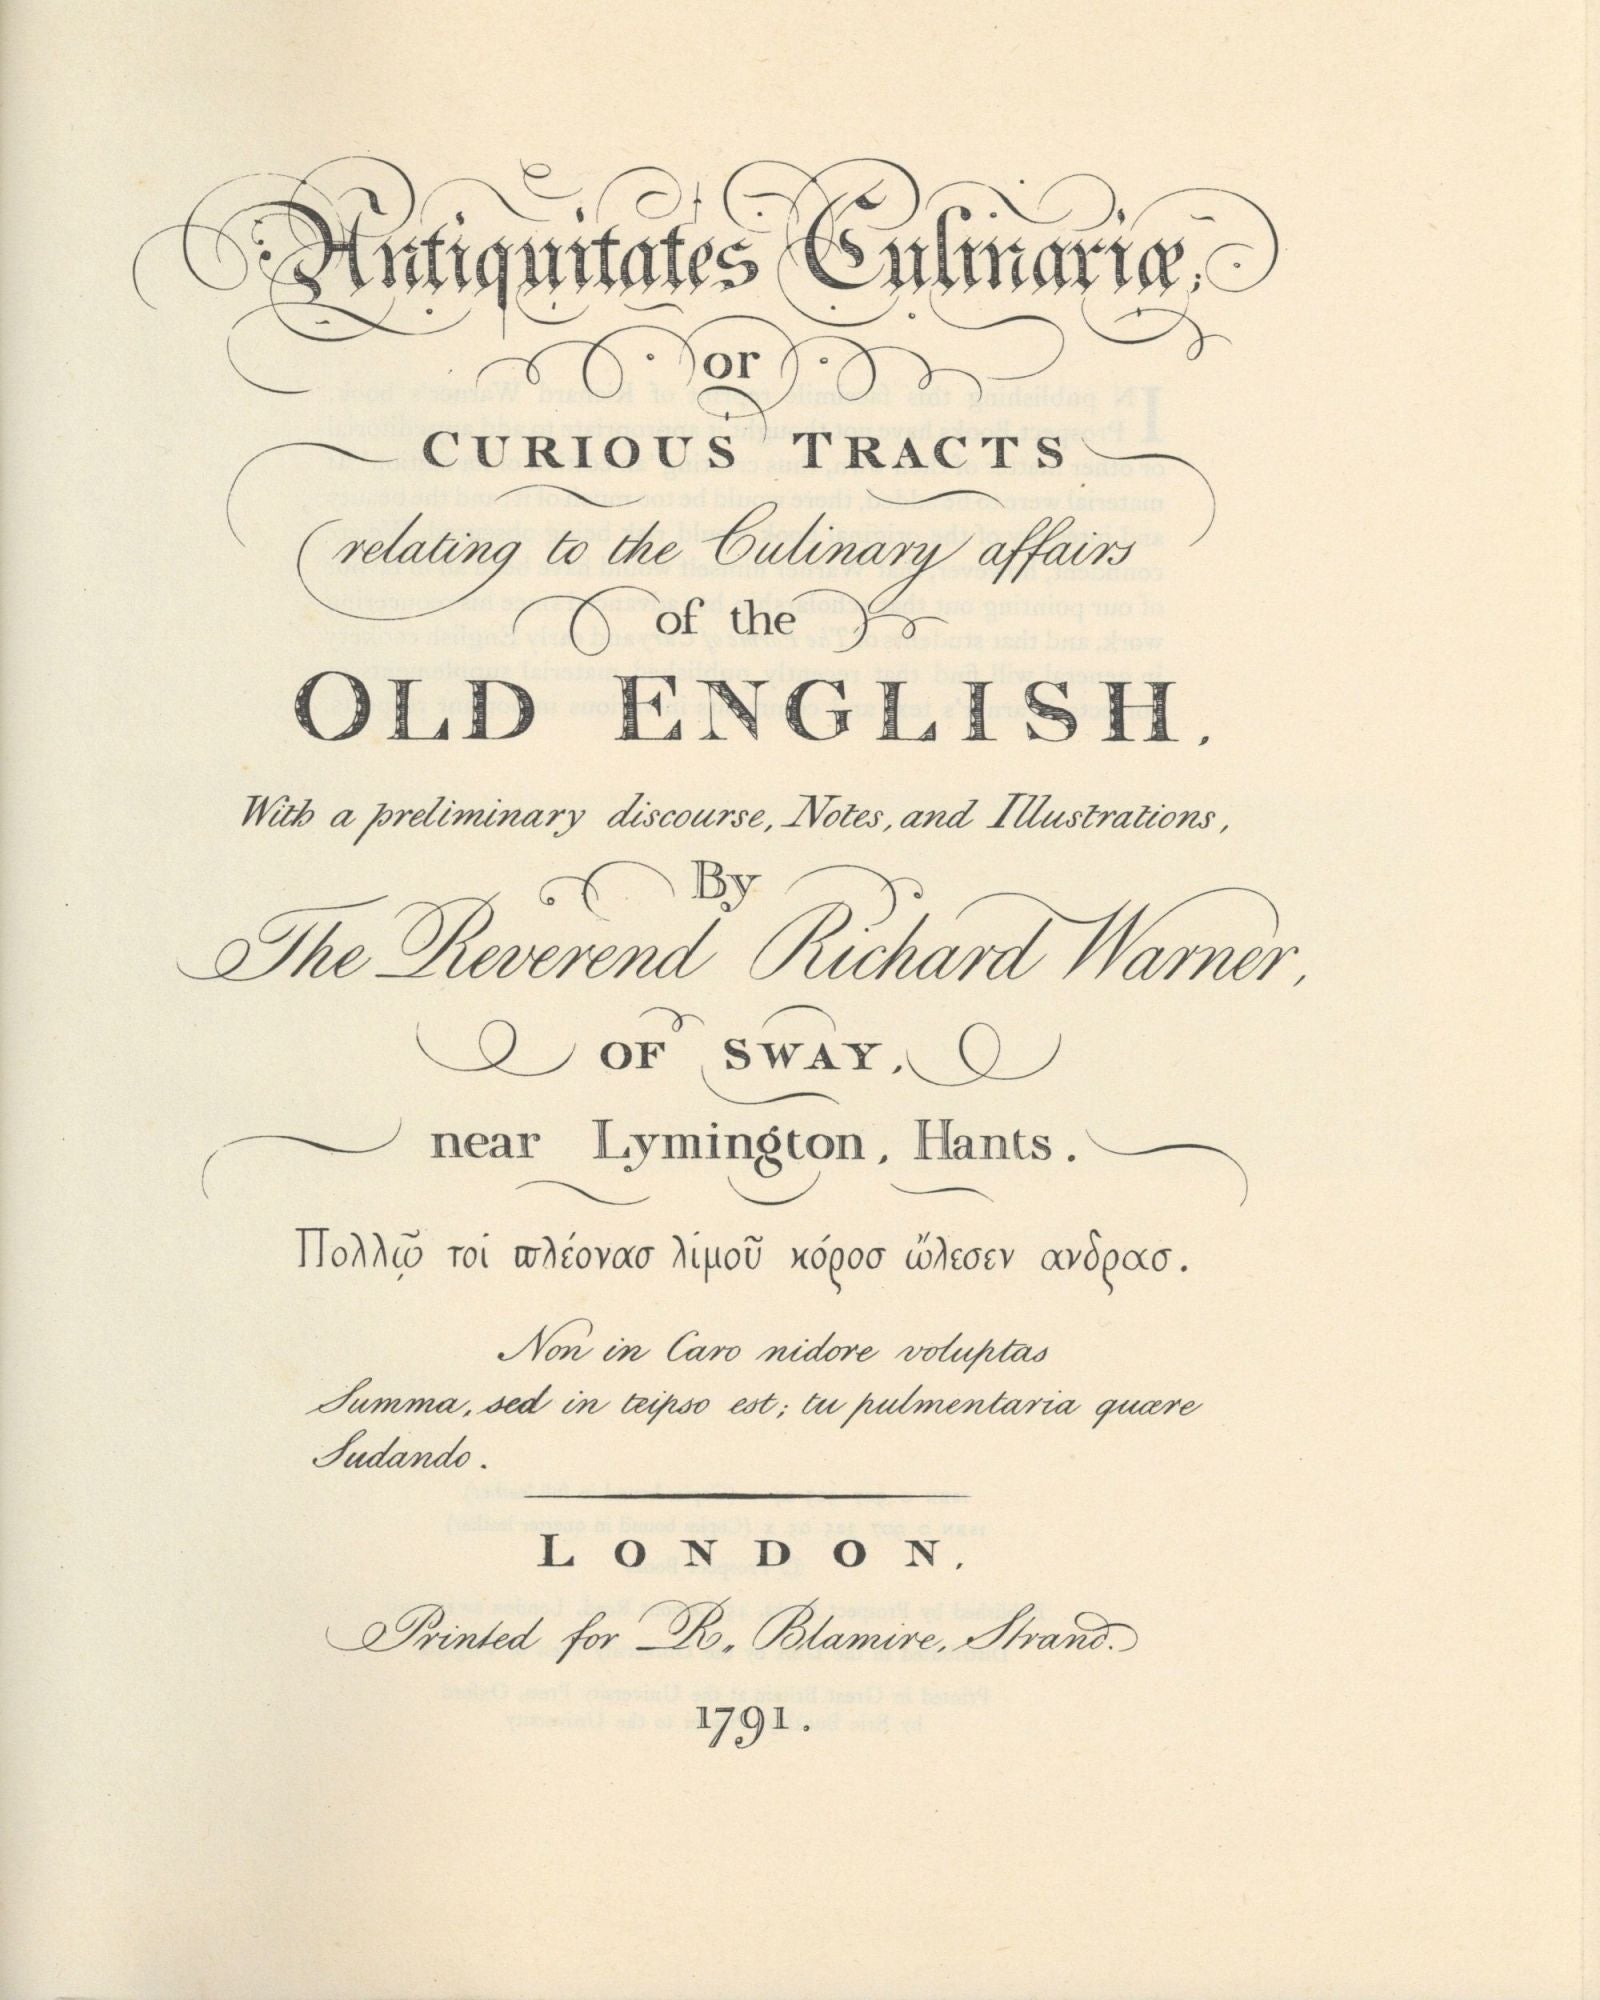 Item #4950 Antiquitate Culinariae; or Curious Tracts relating to the Culinary affairs of the Old English. With a preliminary discourse, Notes and Illustrations, By the Reverend Richard Warner, of Sway, near Lymington, Hants. Richard Warner.